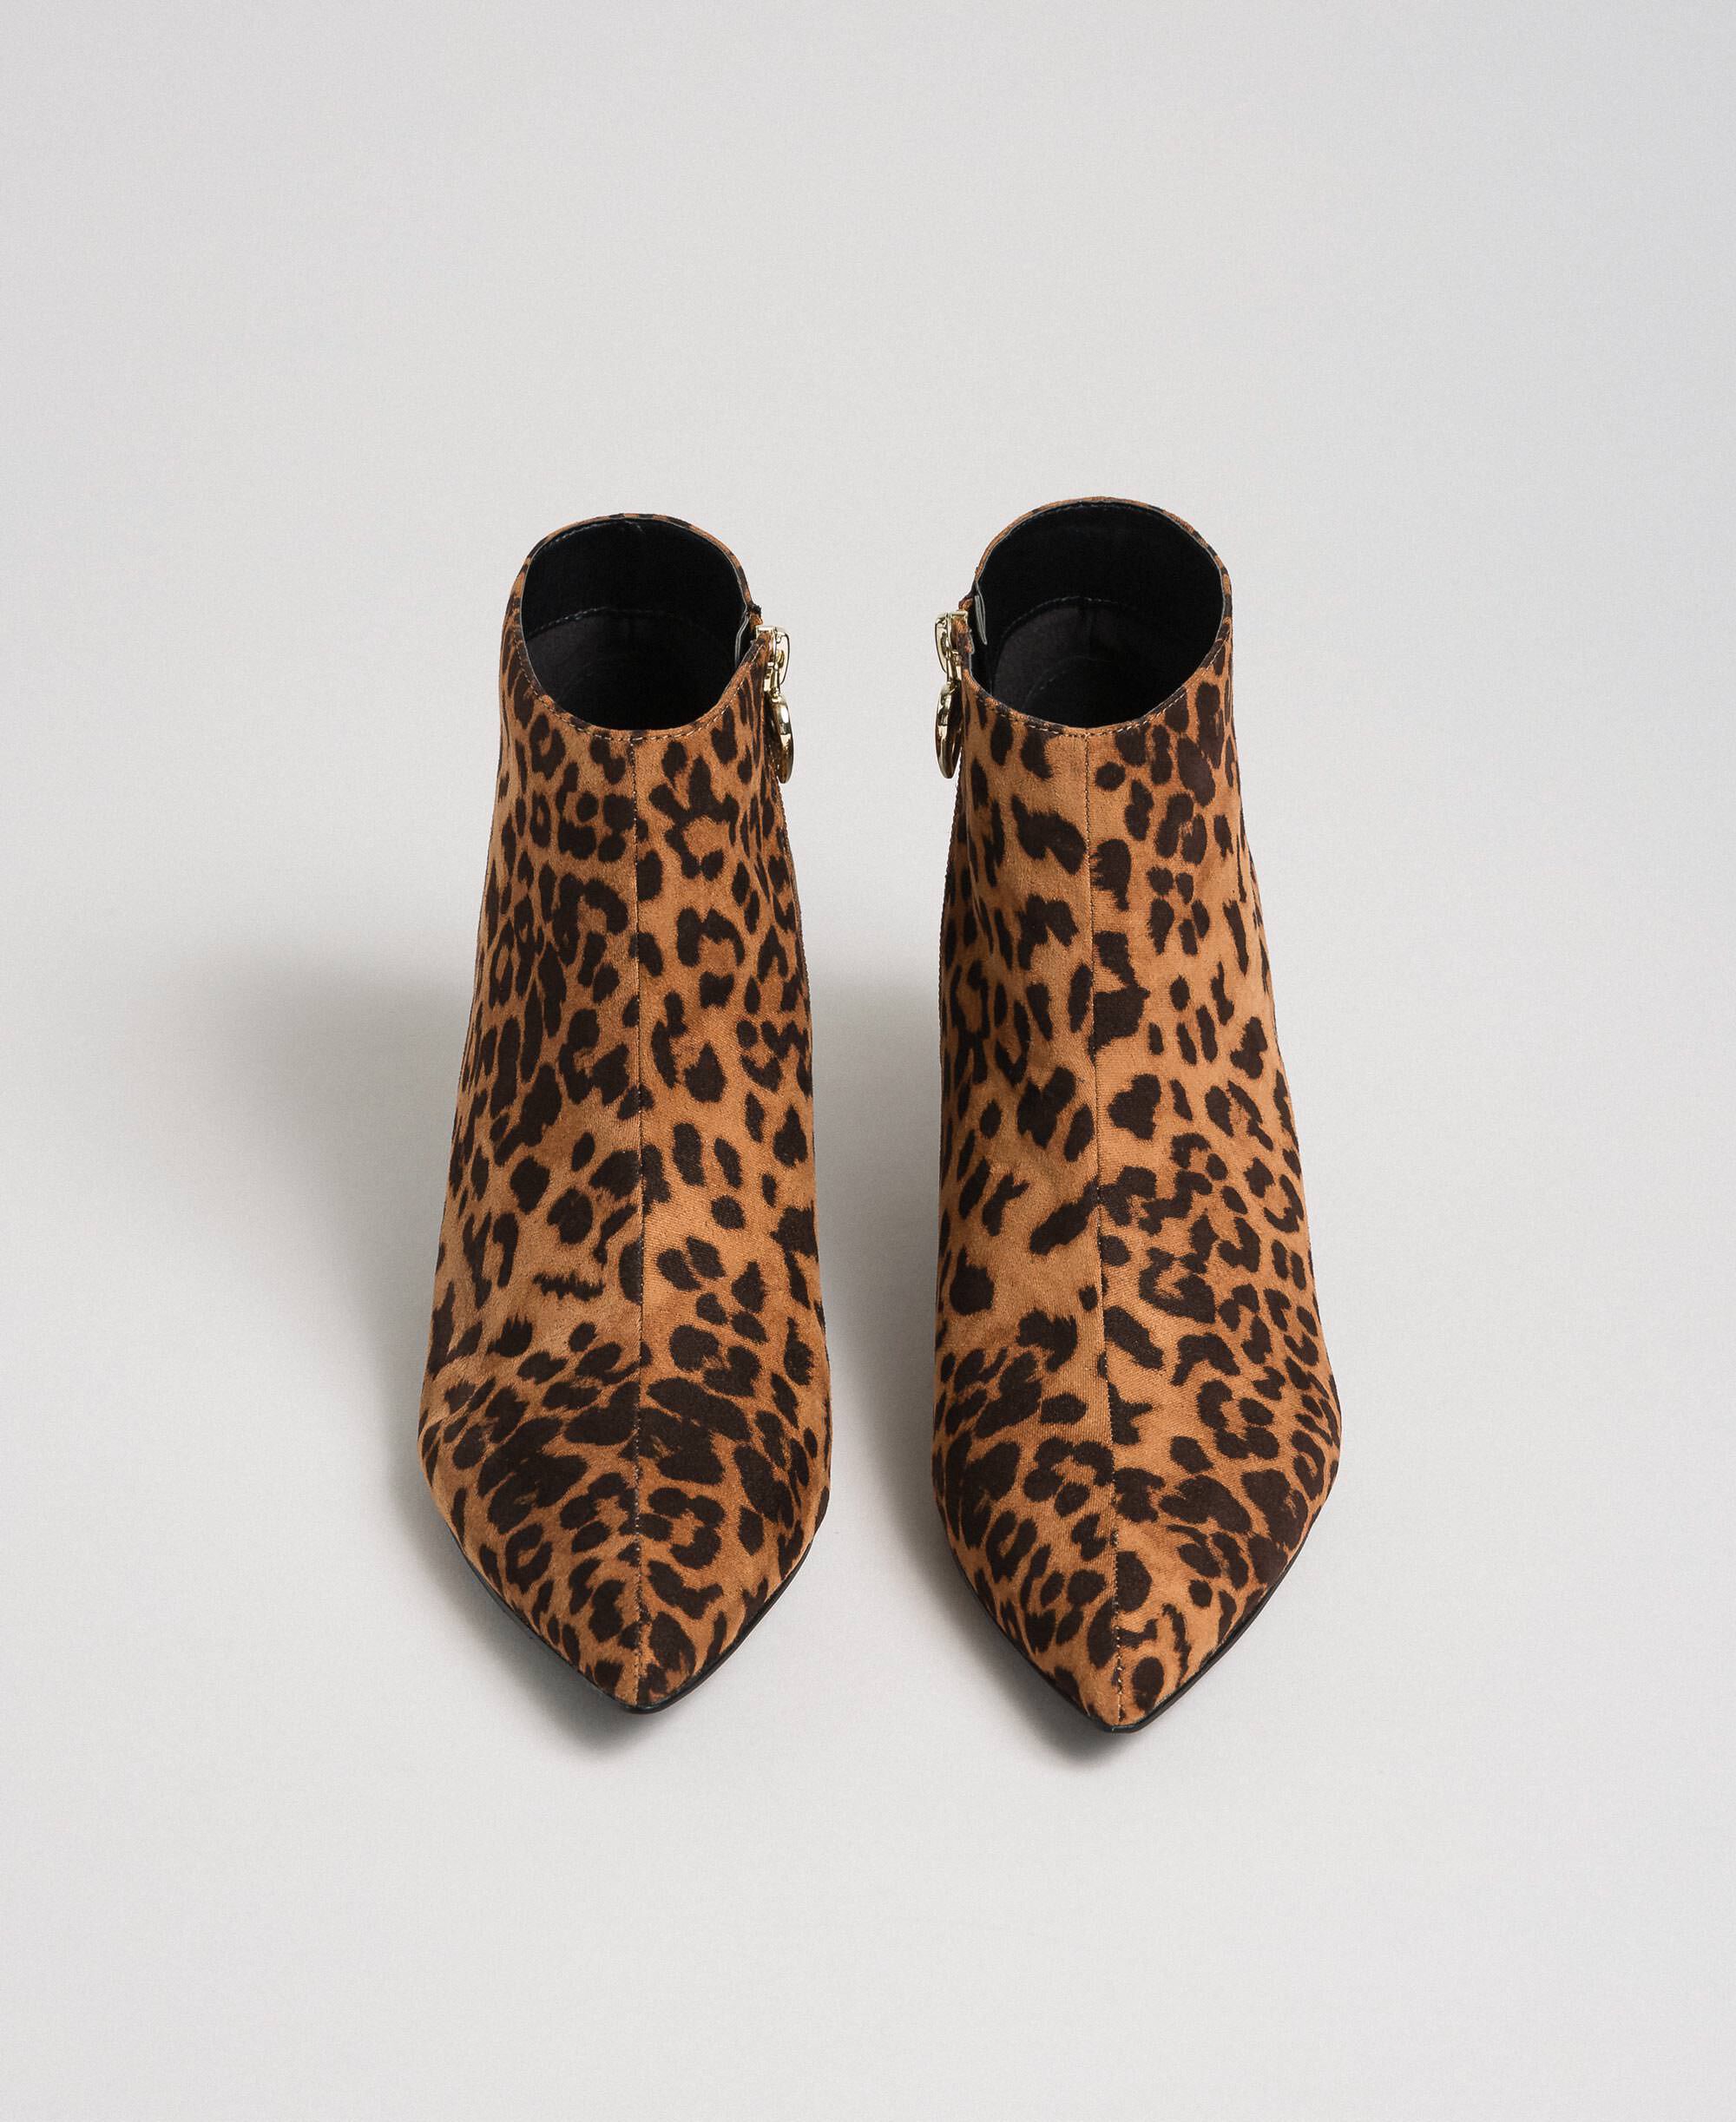 ankle boots animal print